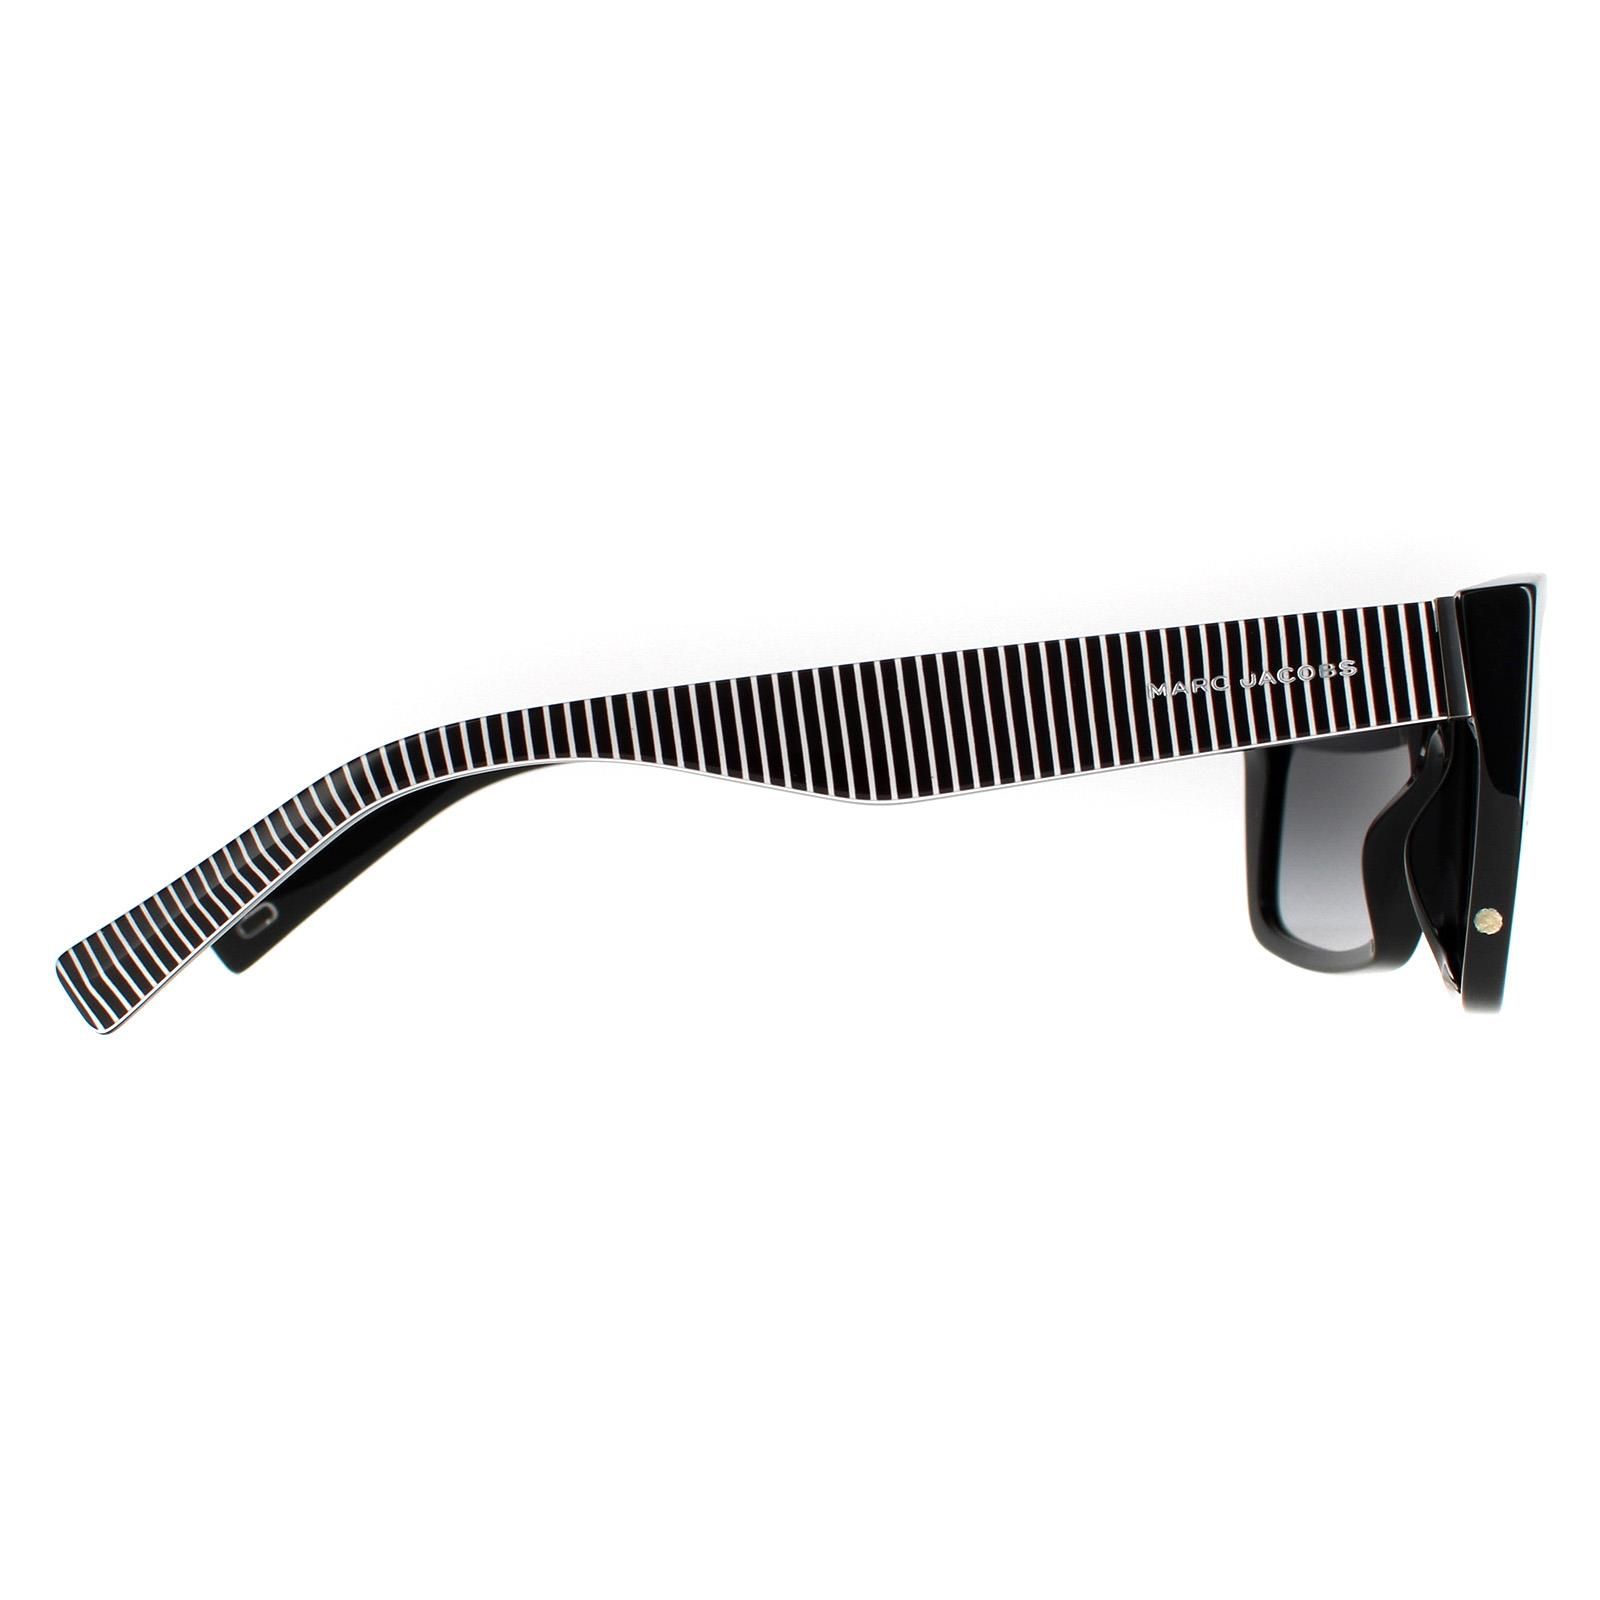 Marc Jacobs Rectangle Unisex Black Dark Grey Gradient Icon 096/S  Marc Jacobs are a modern rectangle style crafted from lightweight acetate. The Marc Jacobs emblem is engraved on the slender temples for brand authenticity.